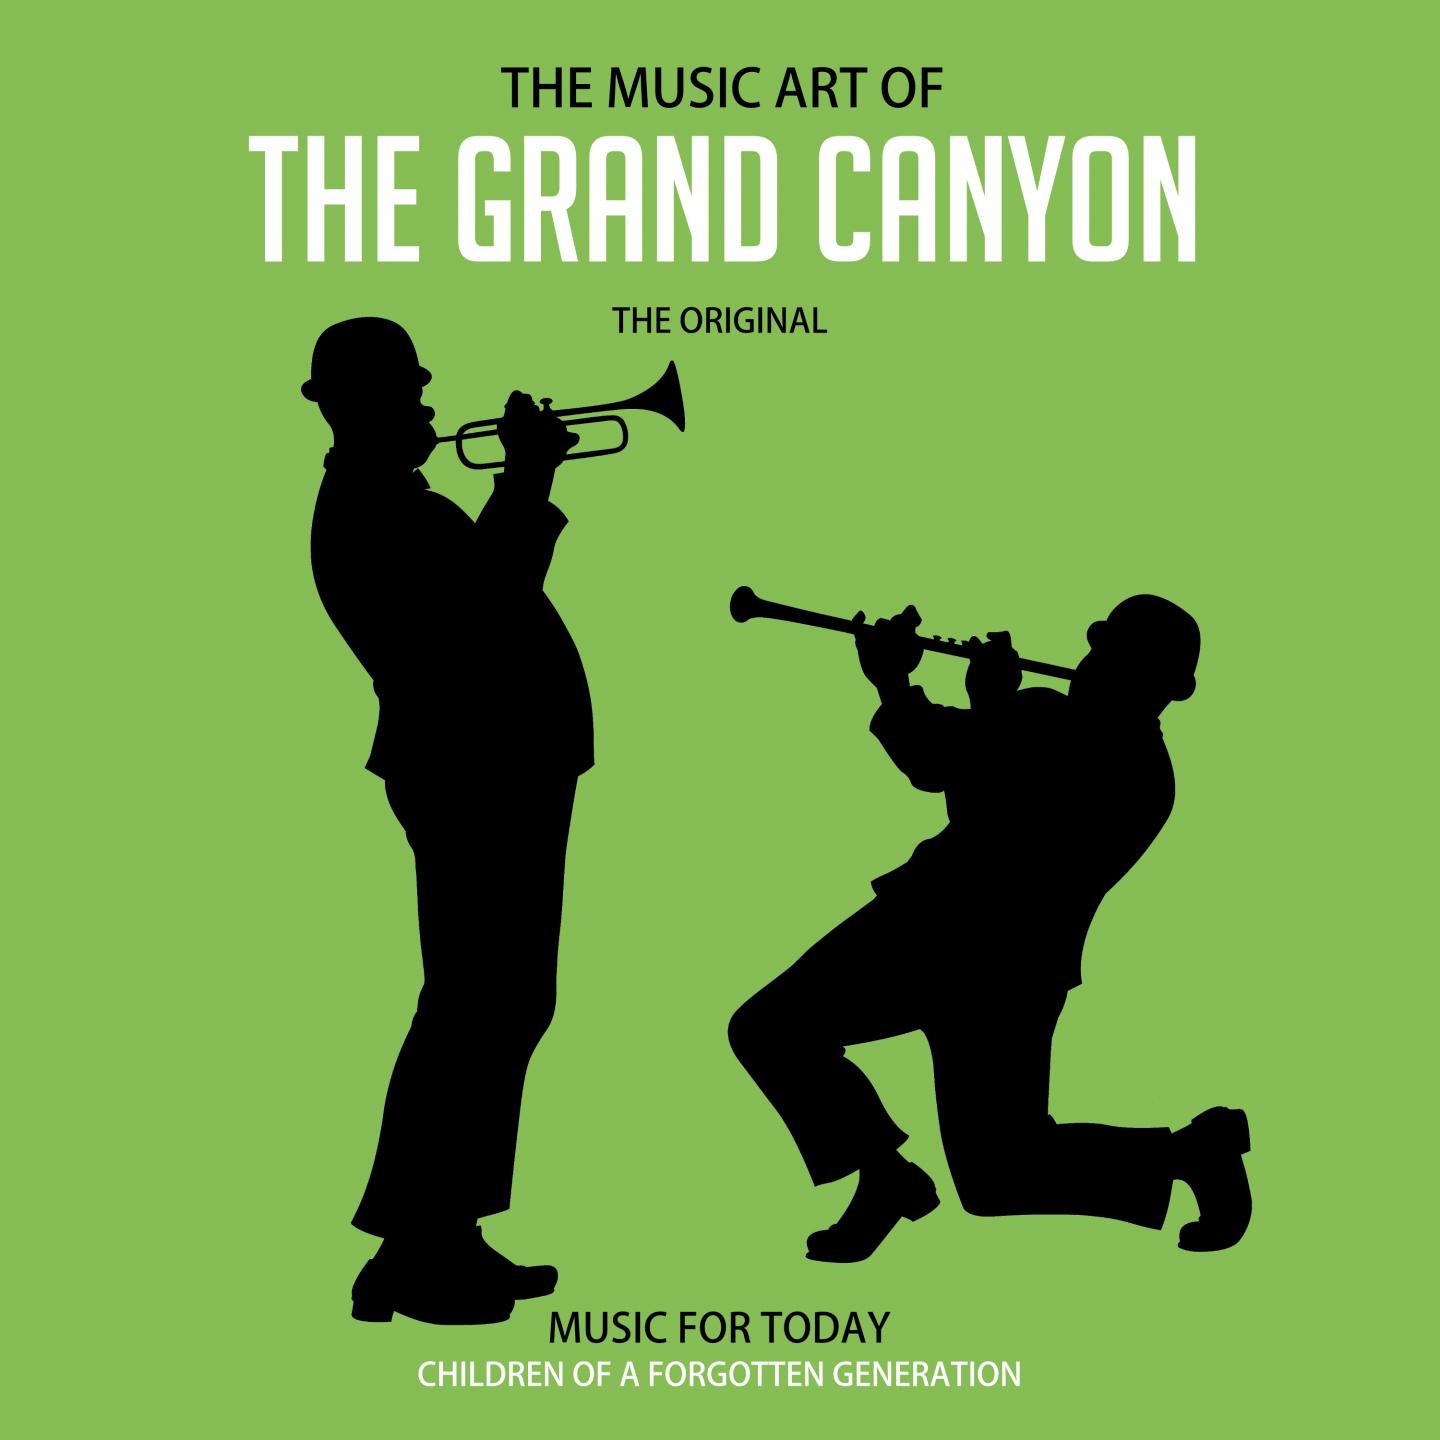 The Music Art of The Grand Canyon